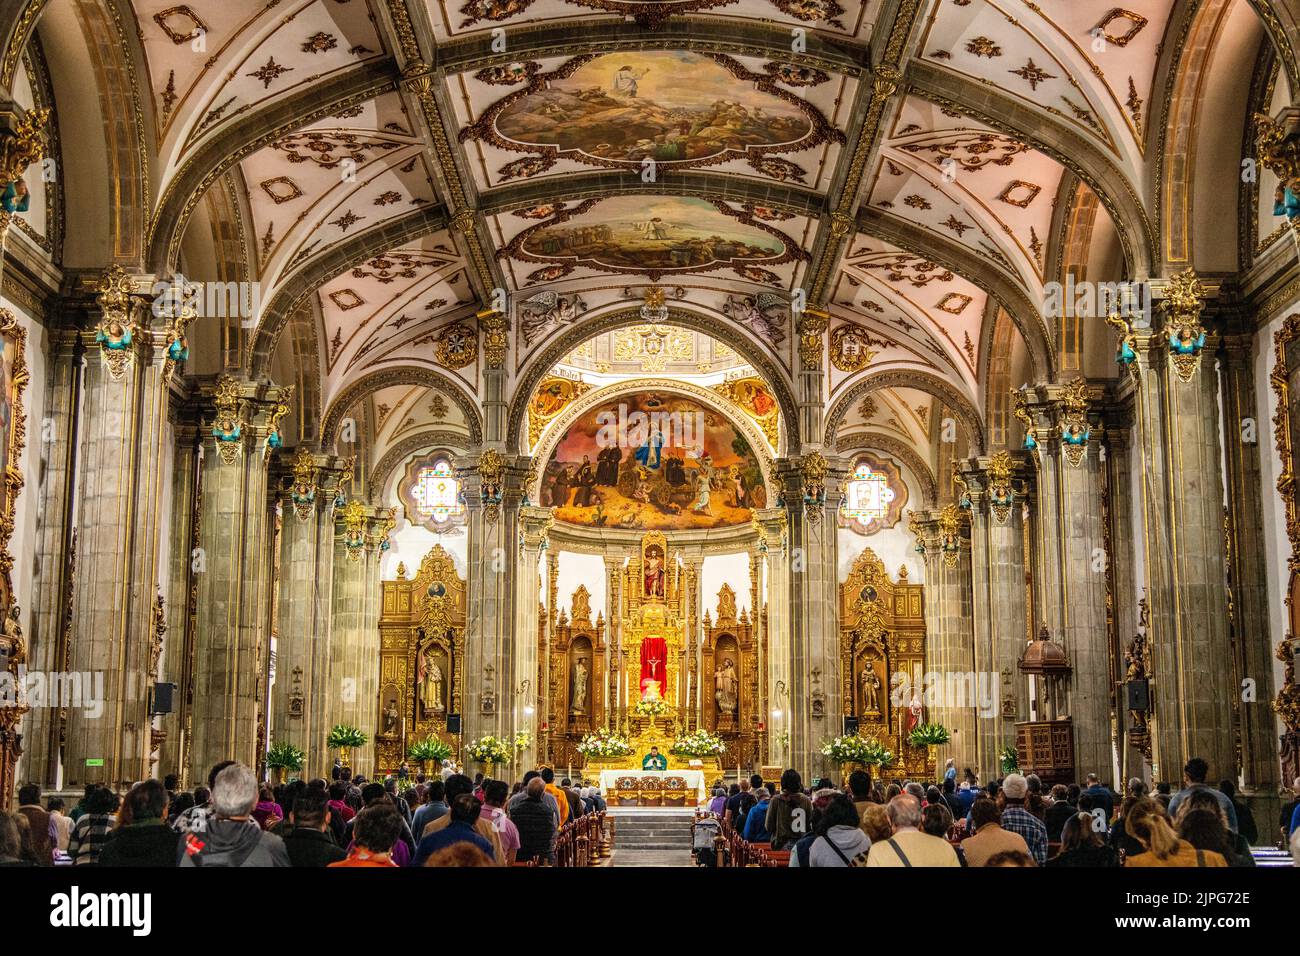 A service taking place inside Parroquia San Juan Bautista in Coyoacan, Mexico City, Mexico Stock Photo